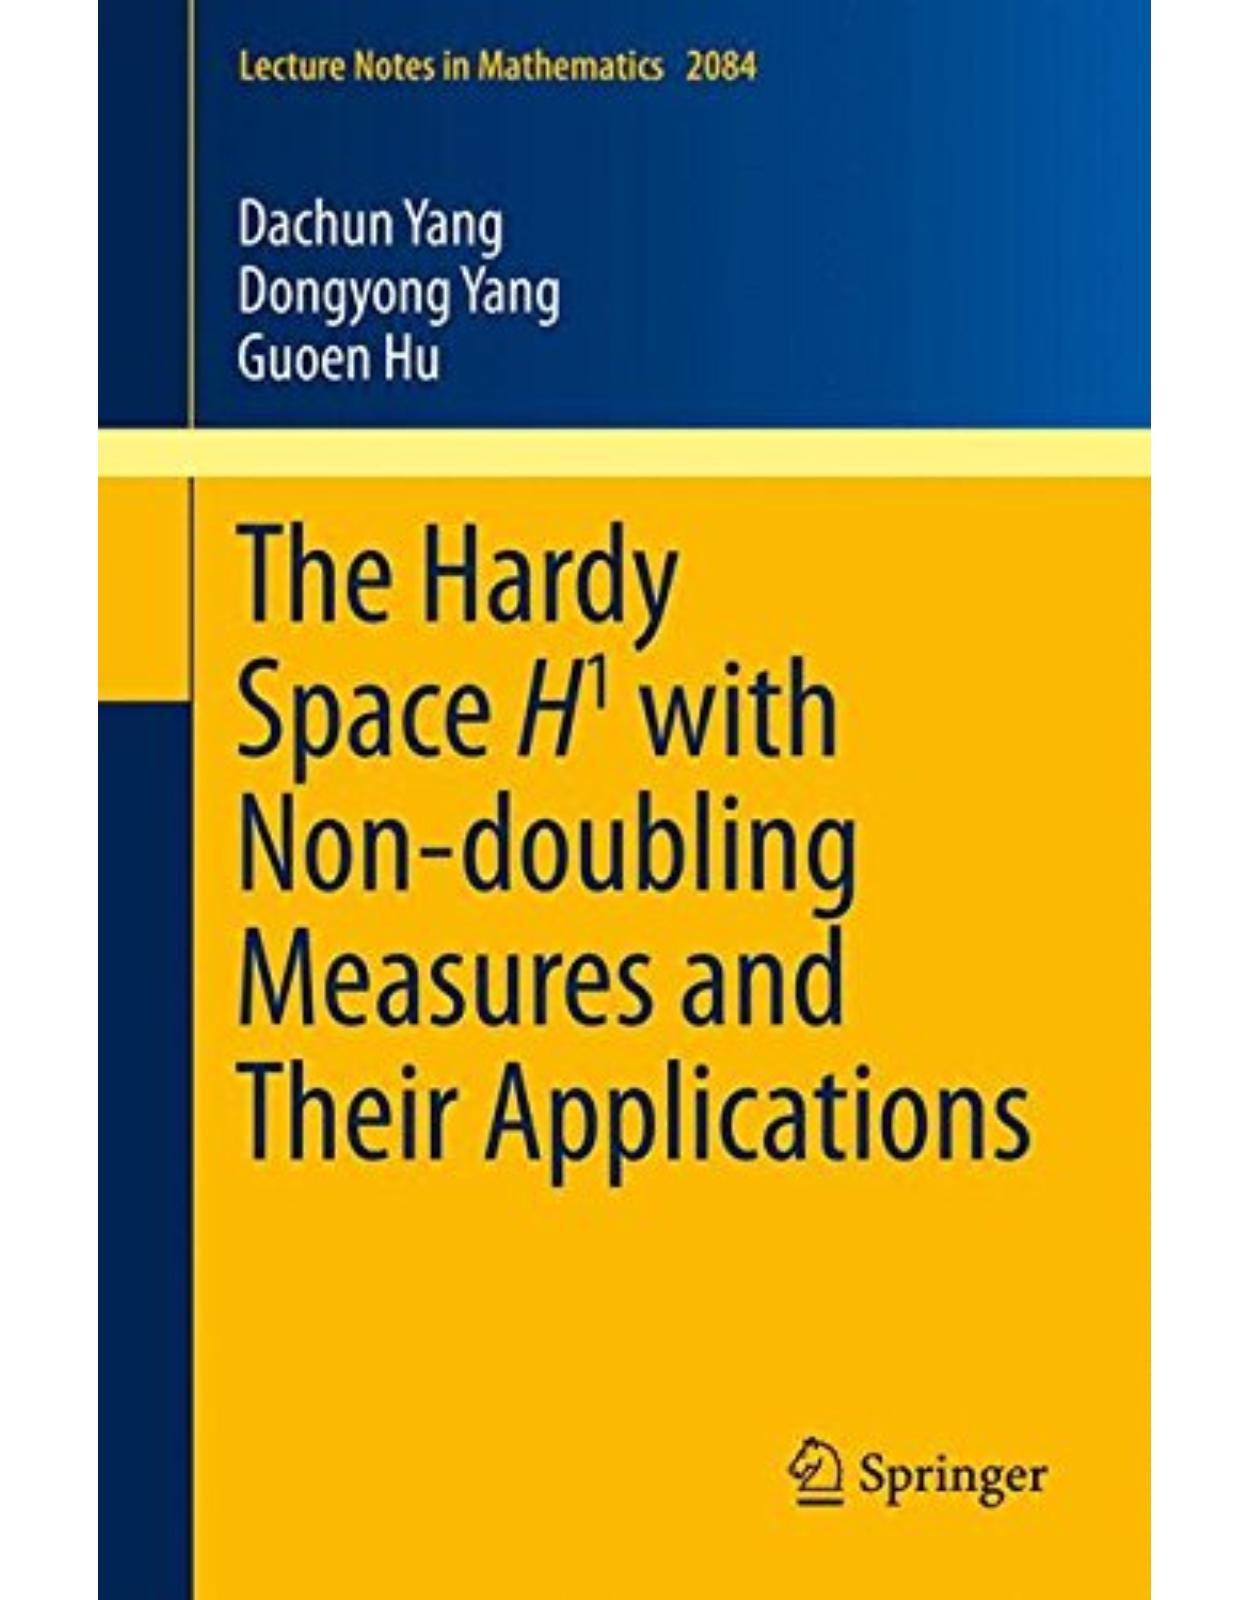 The Hardy Space H1 with Non-doubling Measures and Their Applications